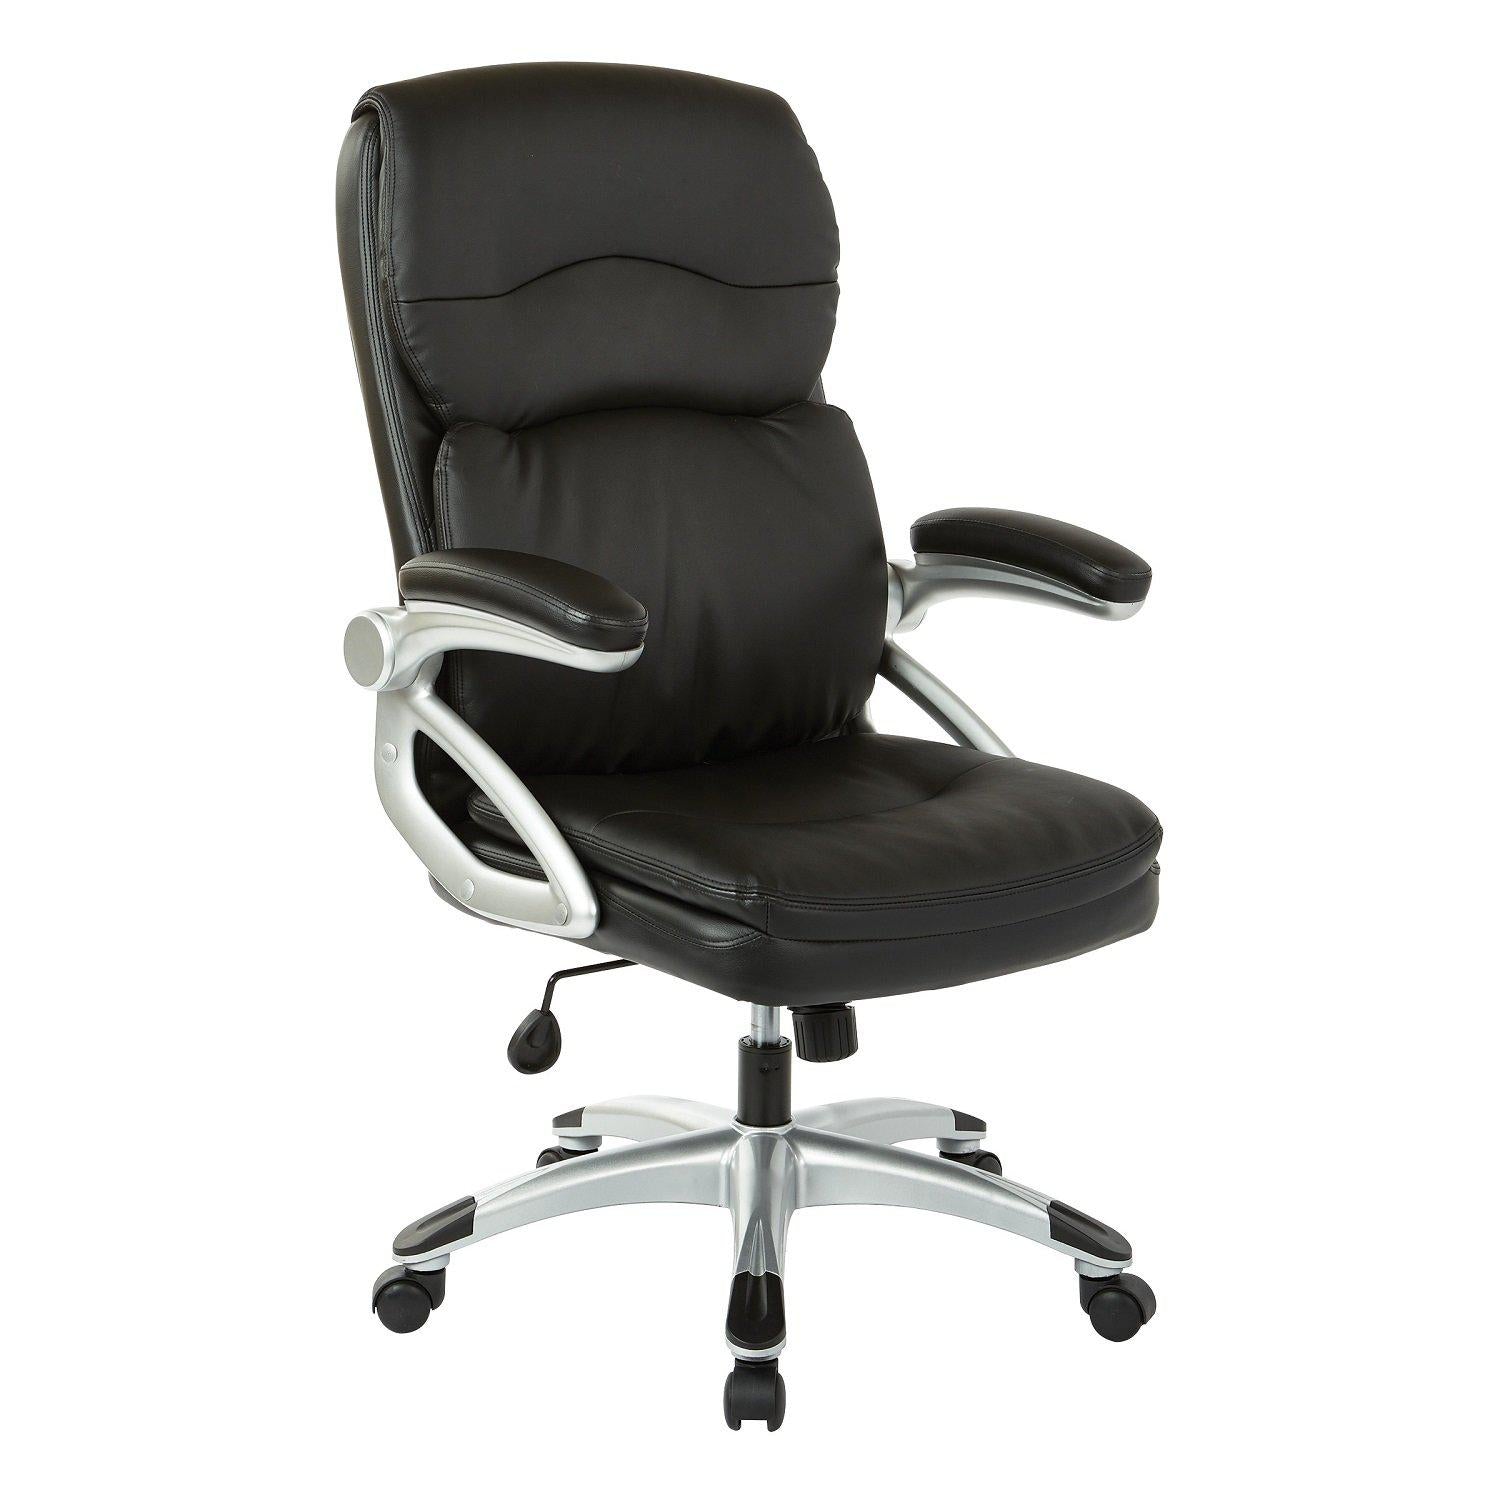 High Back Bonded Leather Executive Manager's Chair, Silver Frame/Black Upholstery